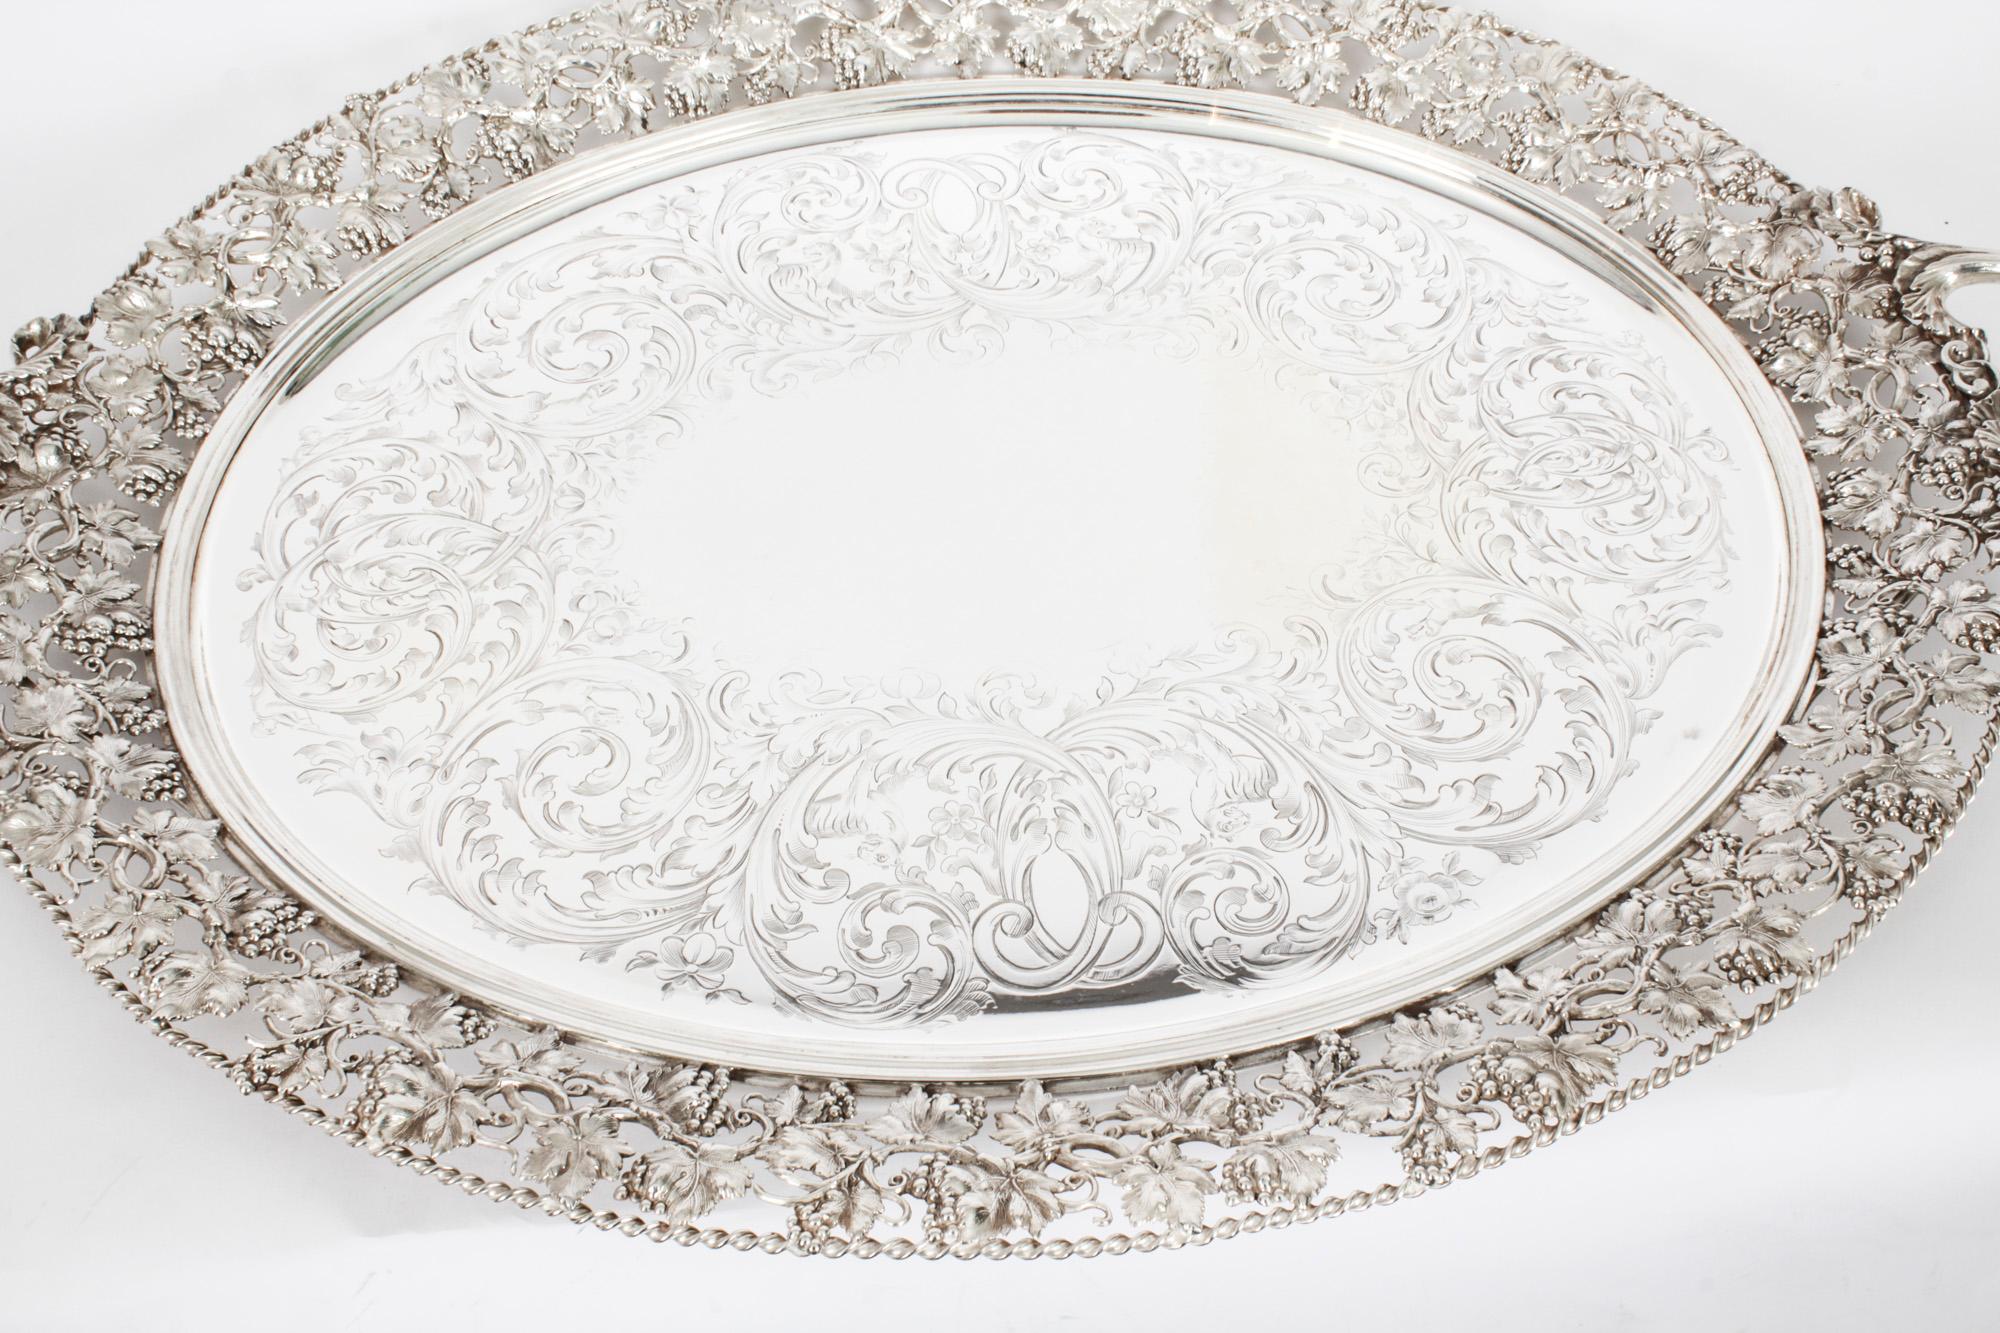 This is a momumental beautiful antique English Victorian oval silver-plated twin handled tray, circa 1870 in date.
 
This large oval silver plated tray features a pair of handles decorated with acanthus leaves. The tray has elegant engraved